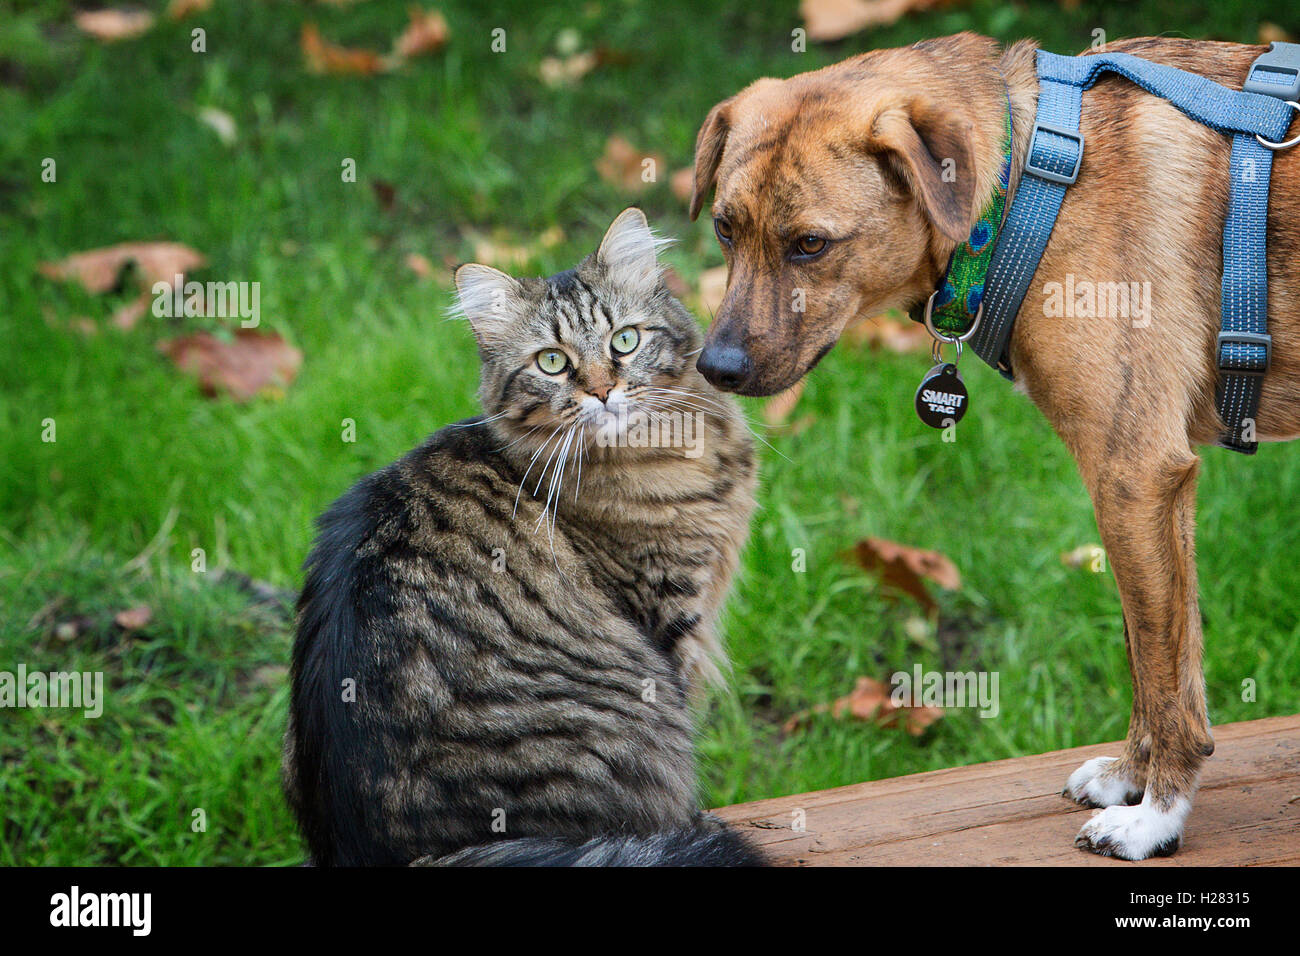 cat and dog hanging out together Stock Photo